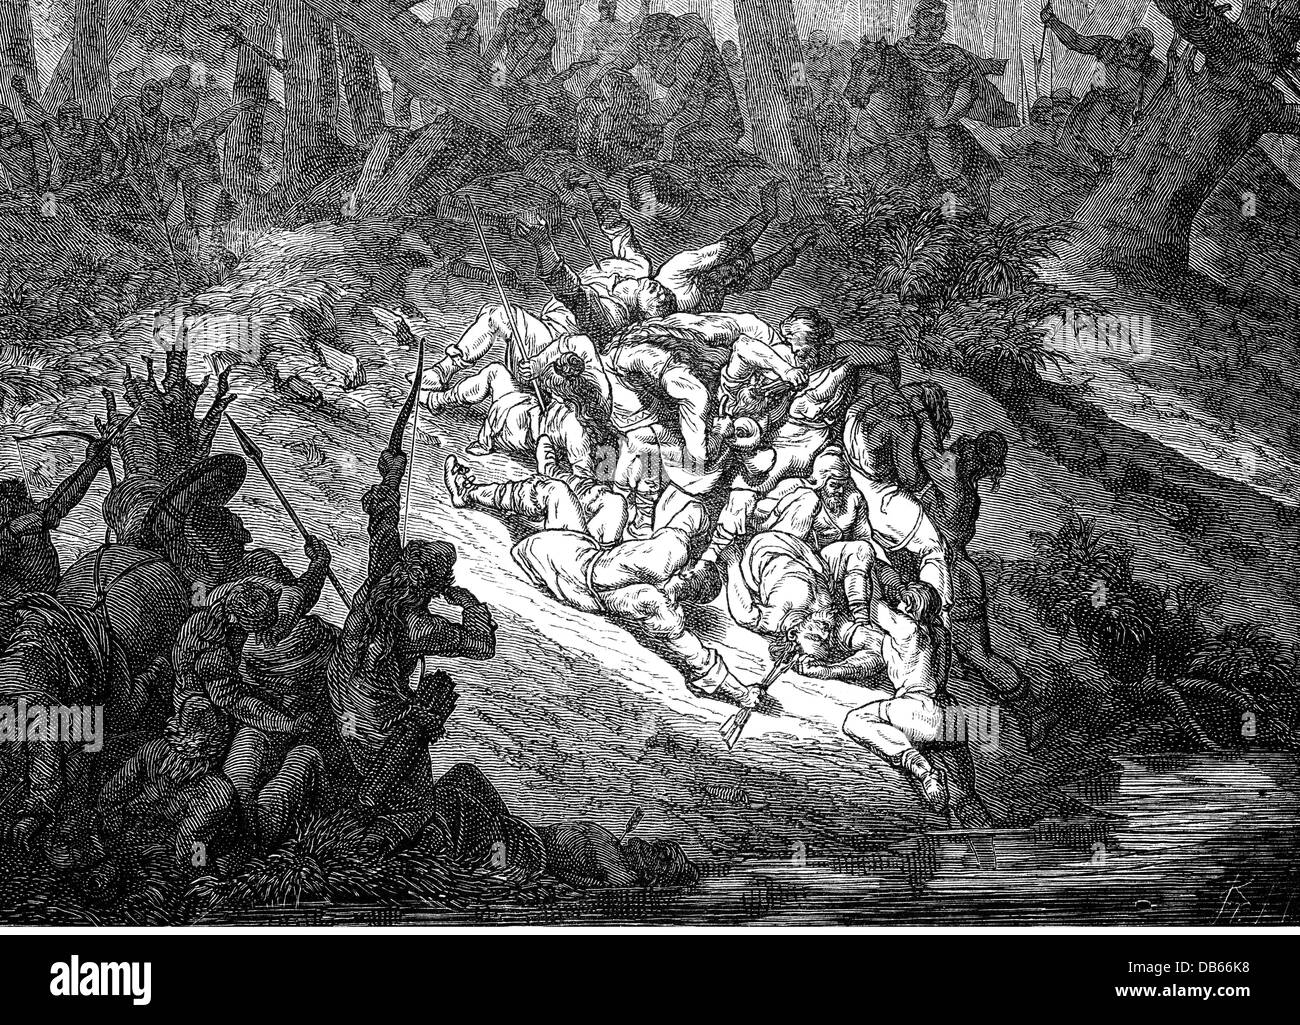 Middle Ages, Magyar Invasions 899 - 955, a Hungarian detachment is defeated at the Droemling Forest, 954, wood engraving, 19th century, historic, historical, Hungarian, Hungarians, wars, war, military, East Francia, 10th century, Germany, fight, fighting, wood, woods, warriors, battle, Droming, Drömling, medieval, people, Additional-Rights-Clearences-Not Available Stock Photo